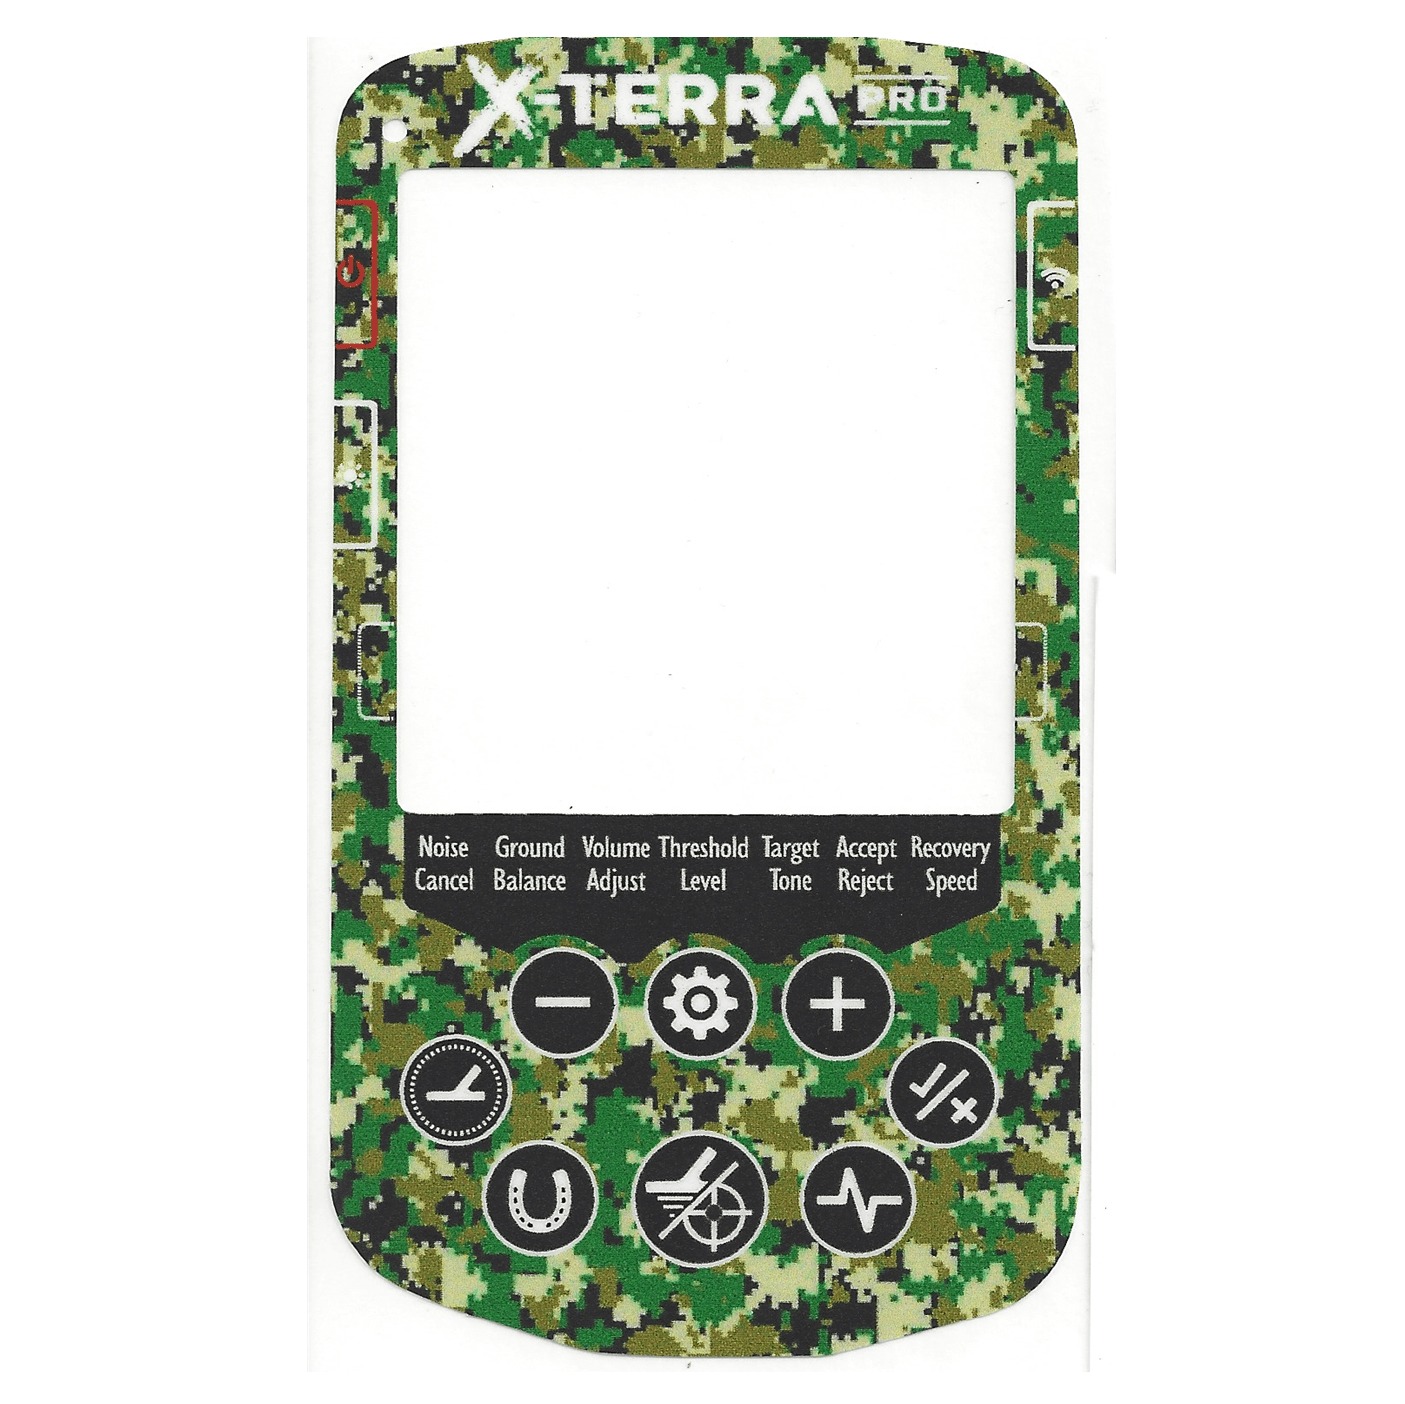 Detecting Innovations Keypad Stickers for the Minelab X-Terra Pro Metal Detector- Multiple Colors Available!